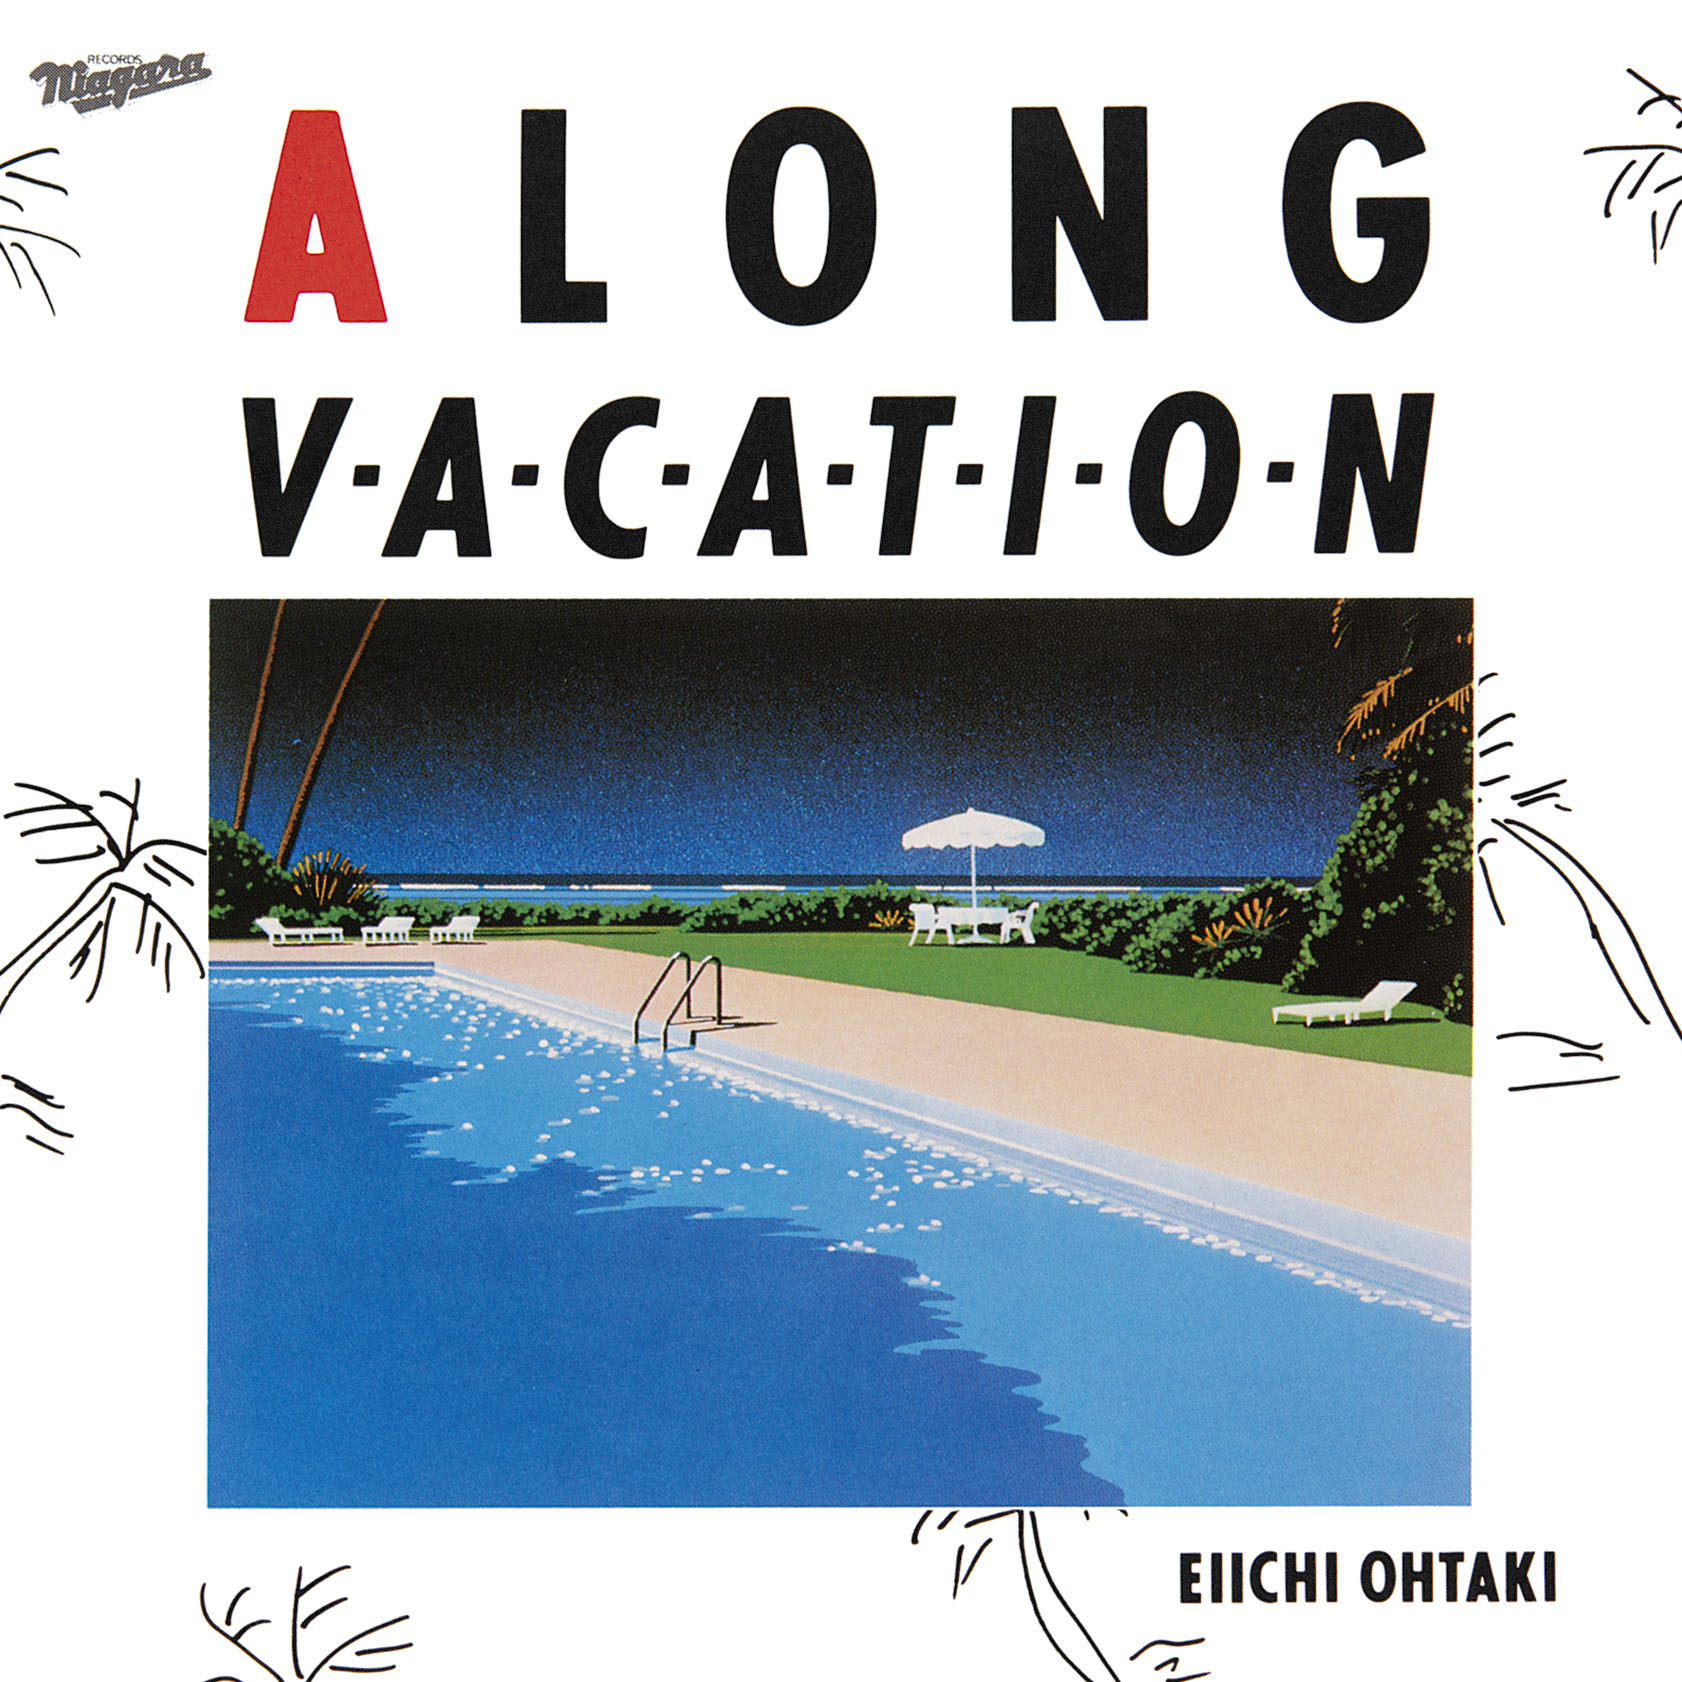 A Long Vacation - 40th Anniversary Edition (2 CDs)